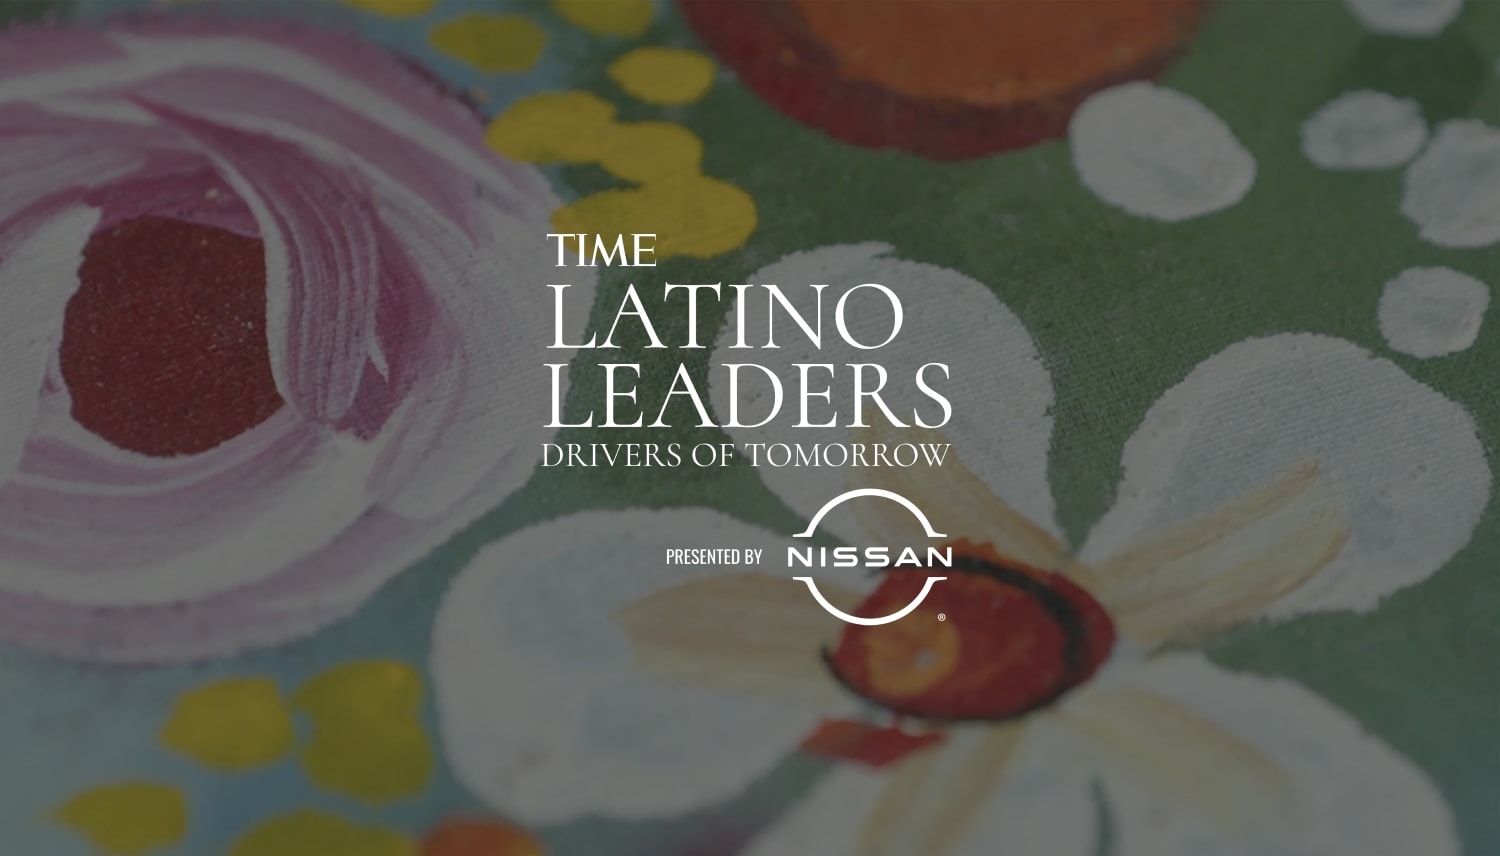 Nissan presents TIME Latino Leaders